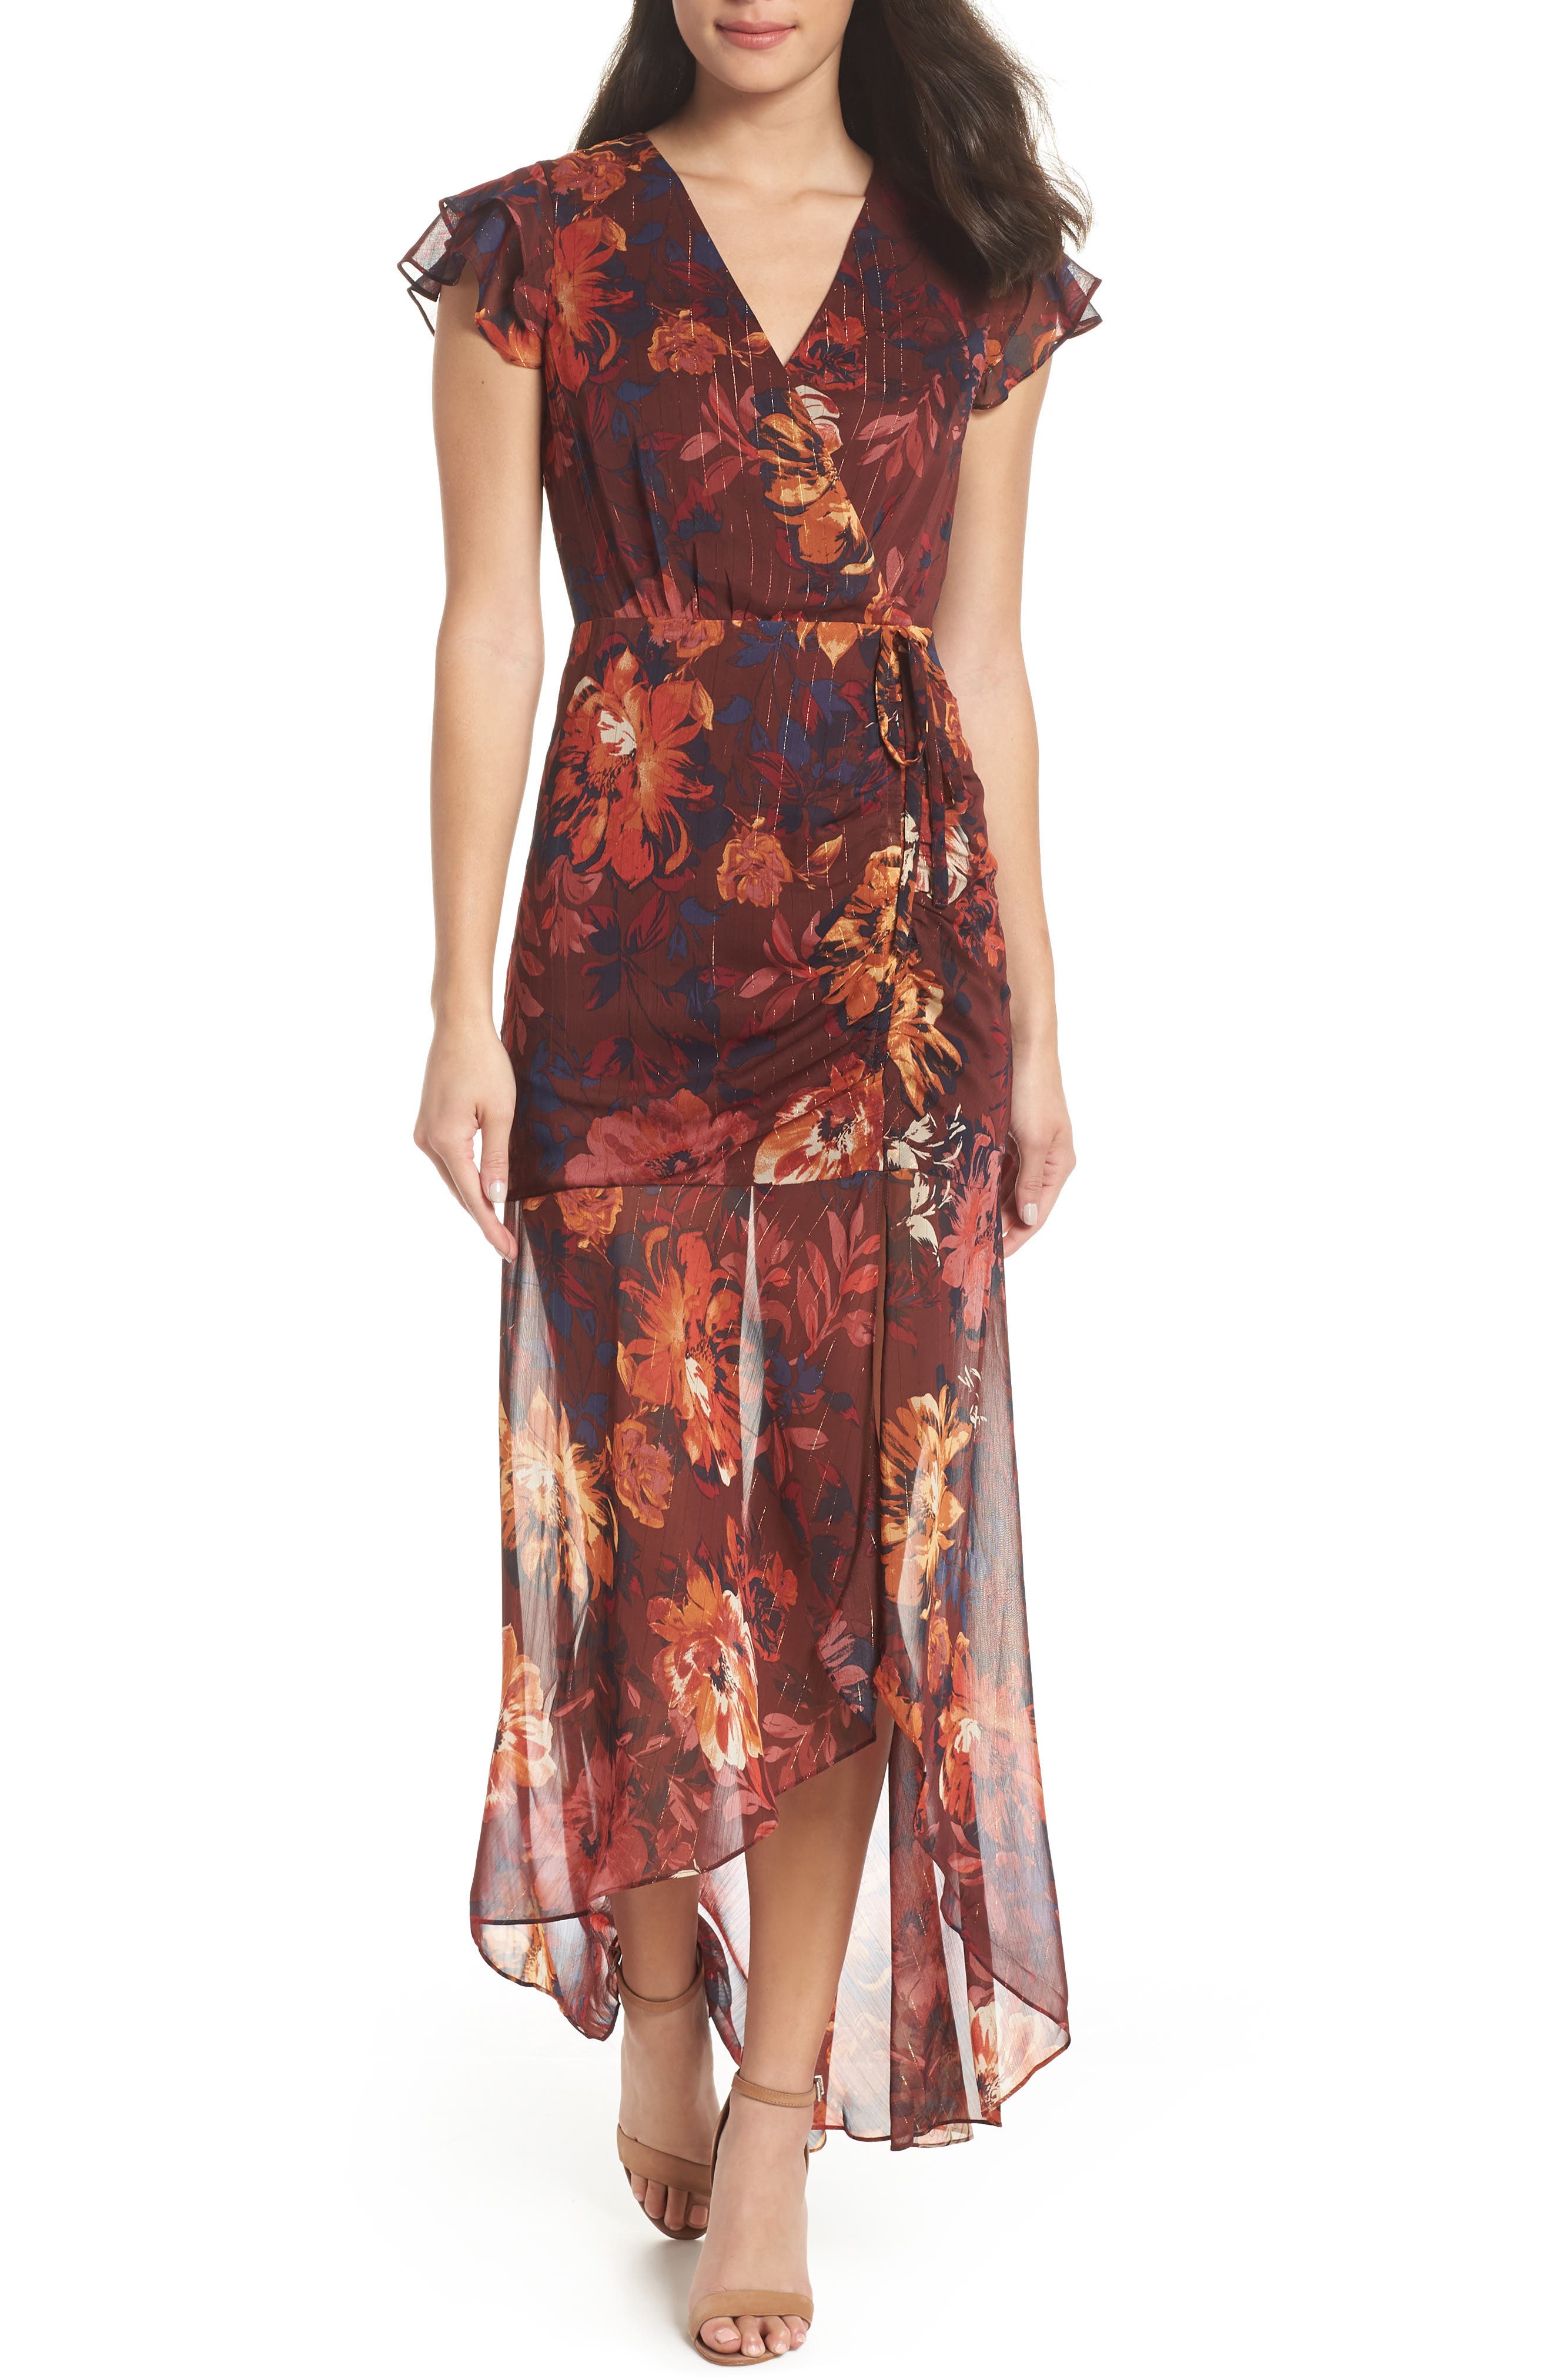 Ali & Jay Made For Walking Maxi Dress In Maroon Floral